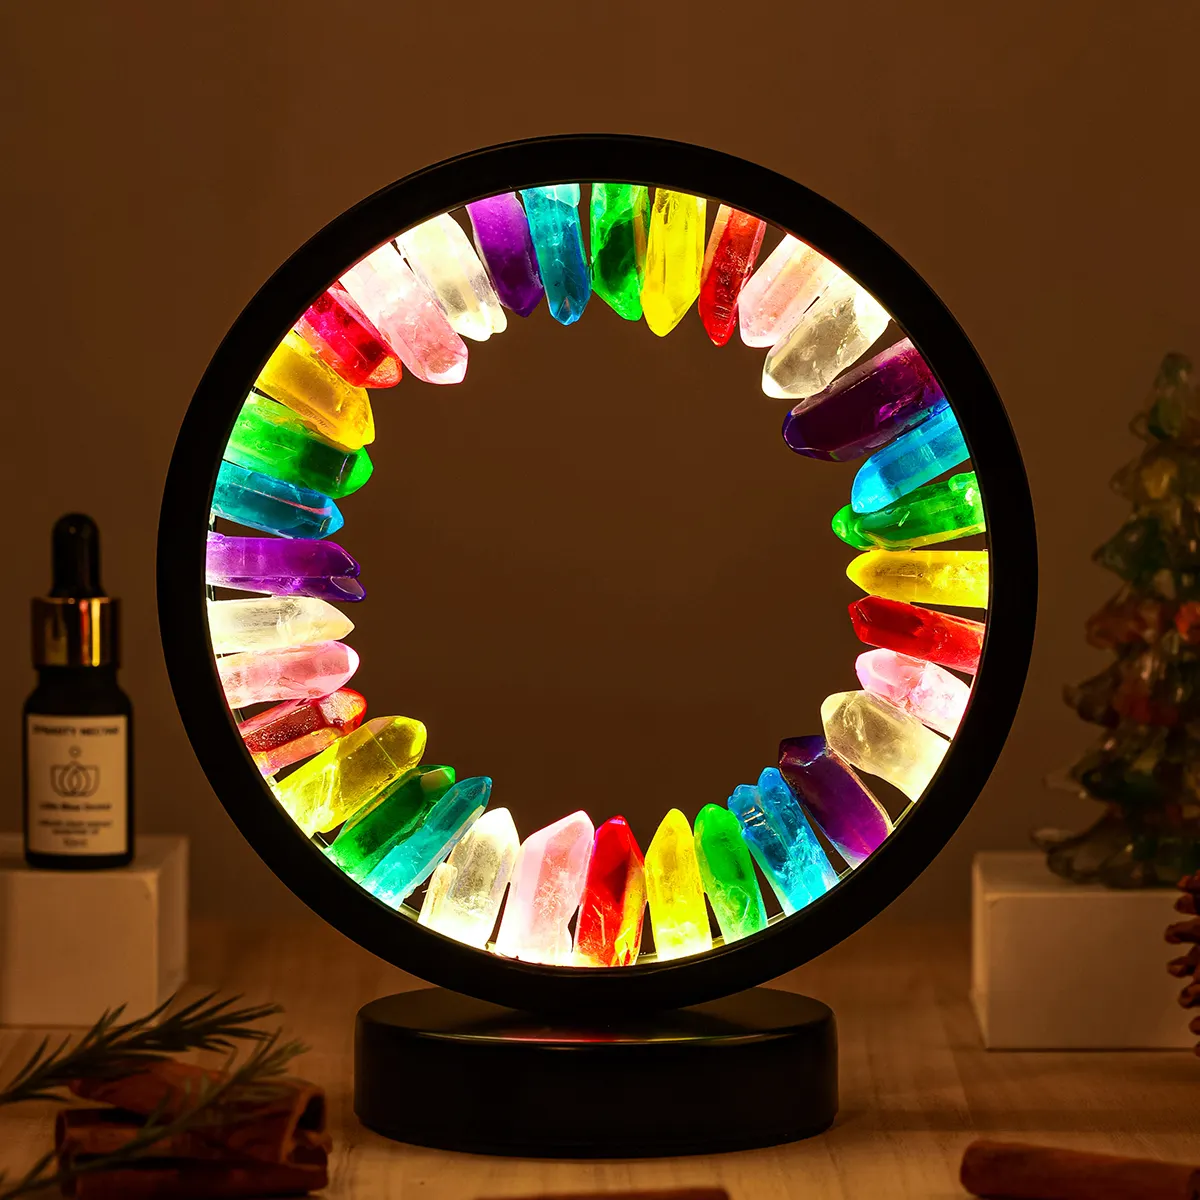 Newest Arrival Popularly Crystal Crafts Angel Aura Point Round Night Light Lamp for Decoration